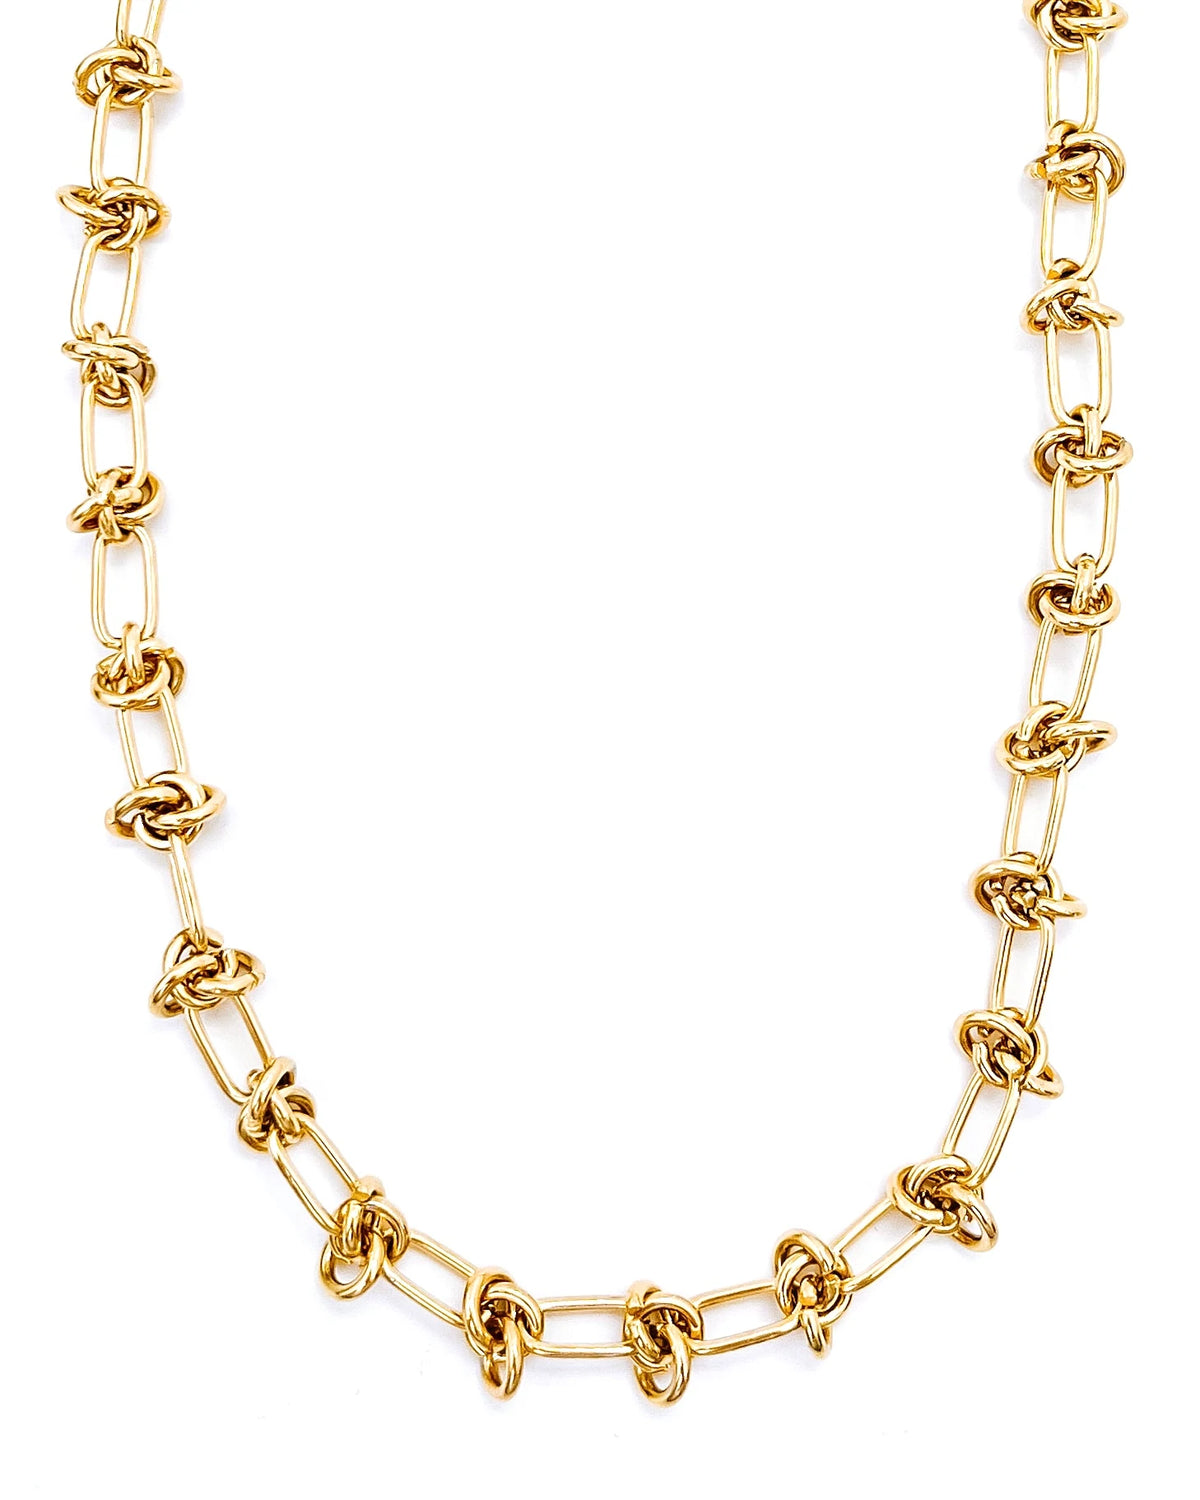 Chrishelle Gold Knot Chain Necklace - Sophie